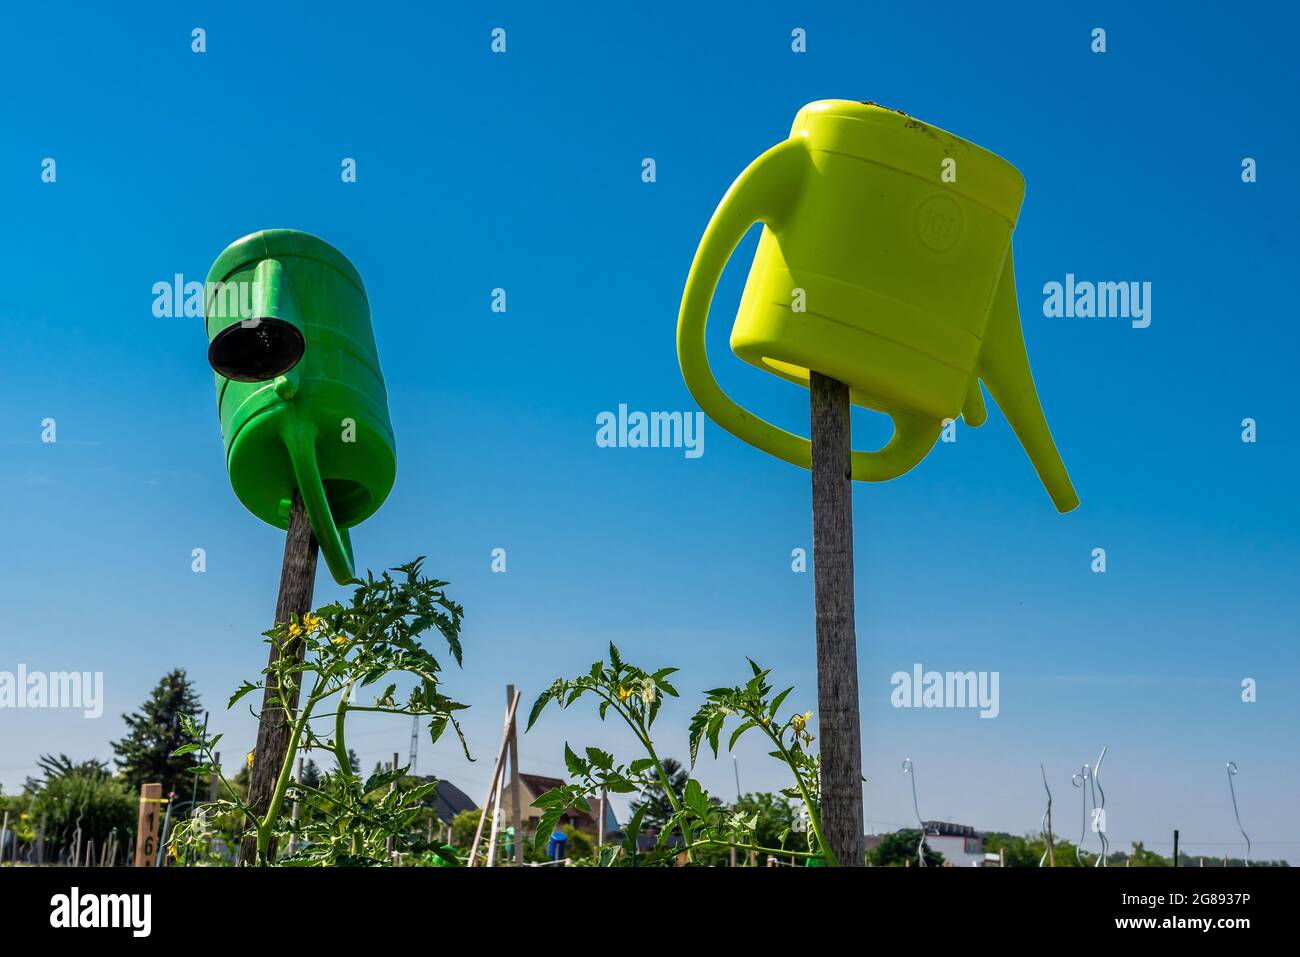 Two Plastic Watering Cans Sticked Upside Down On Wooden Poles Stock Photo